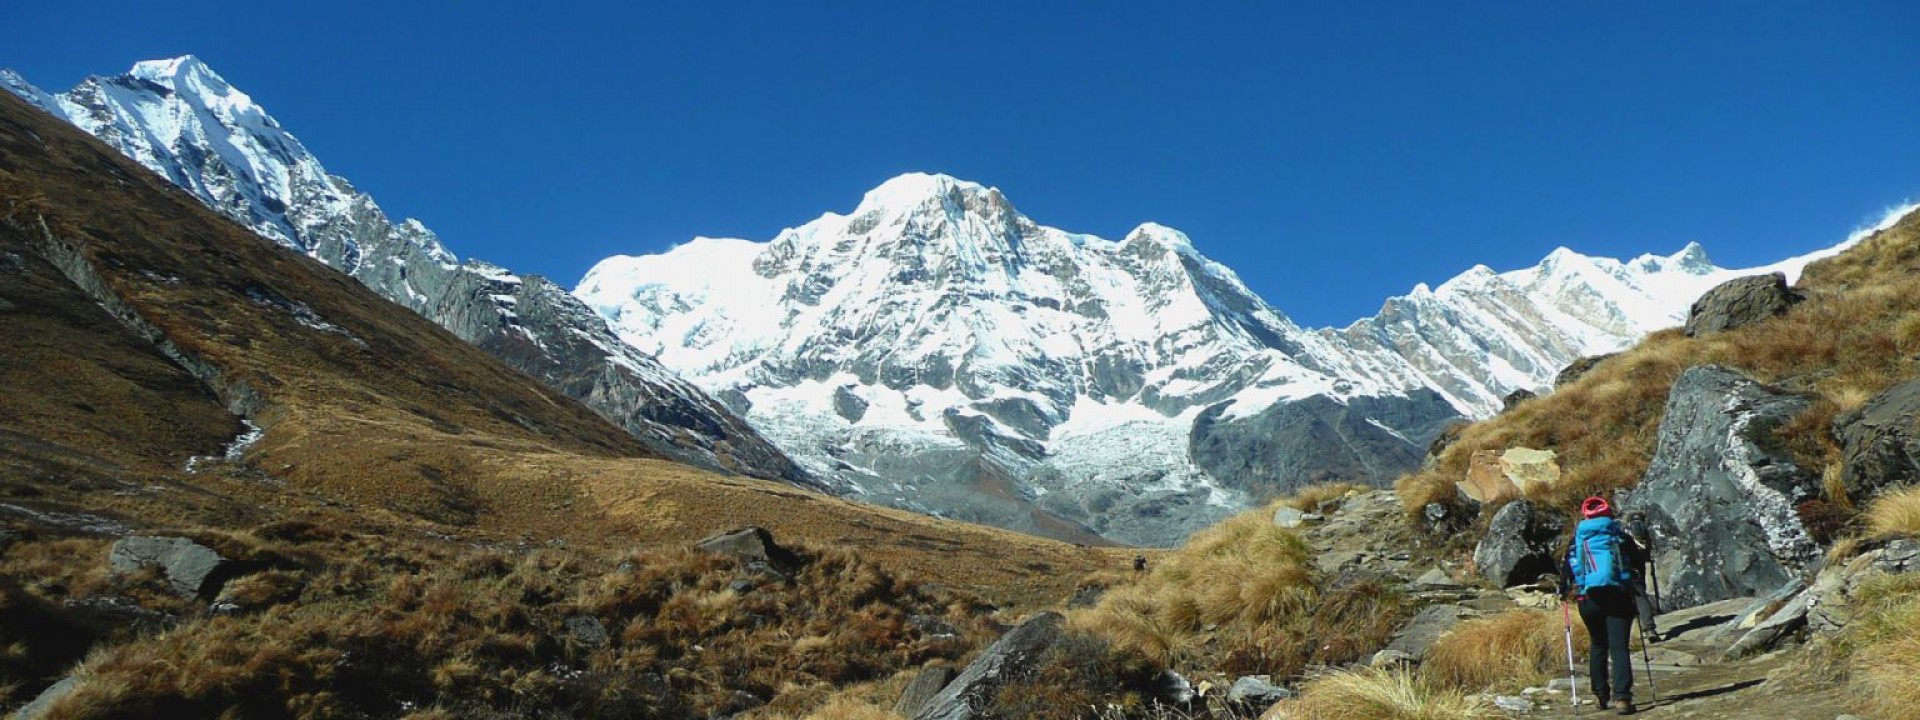 Annapurna Region trekking Map and Complete Guide